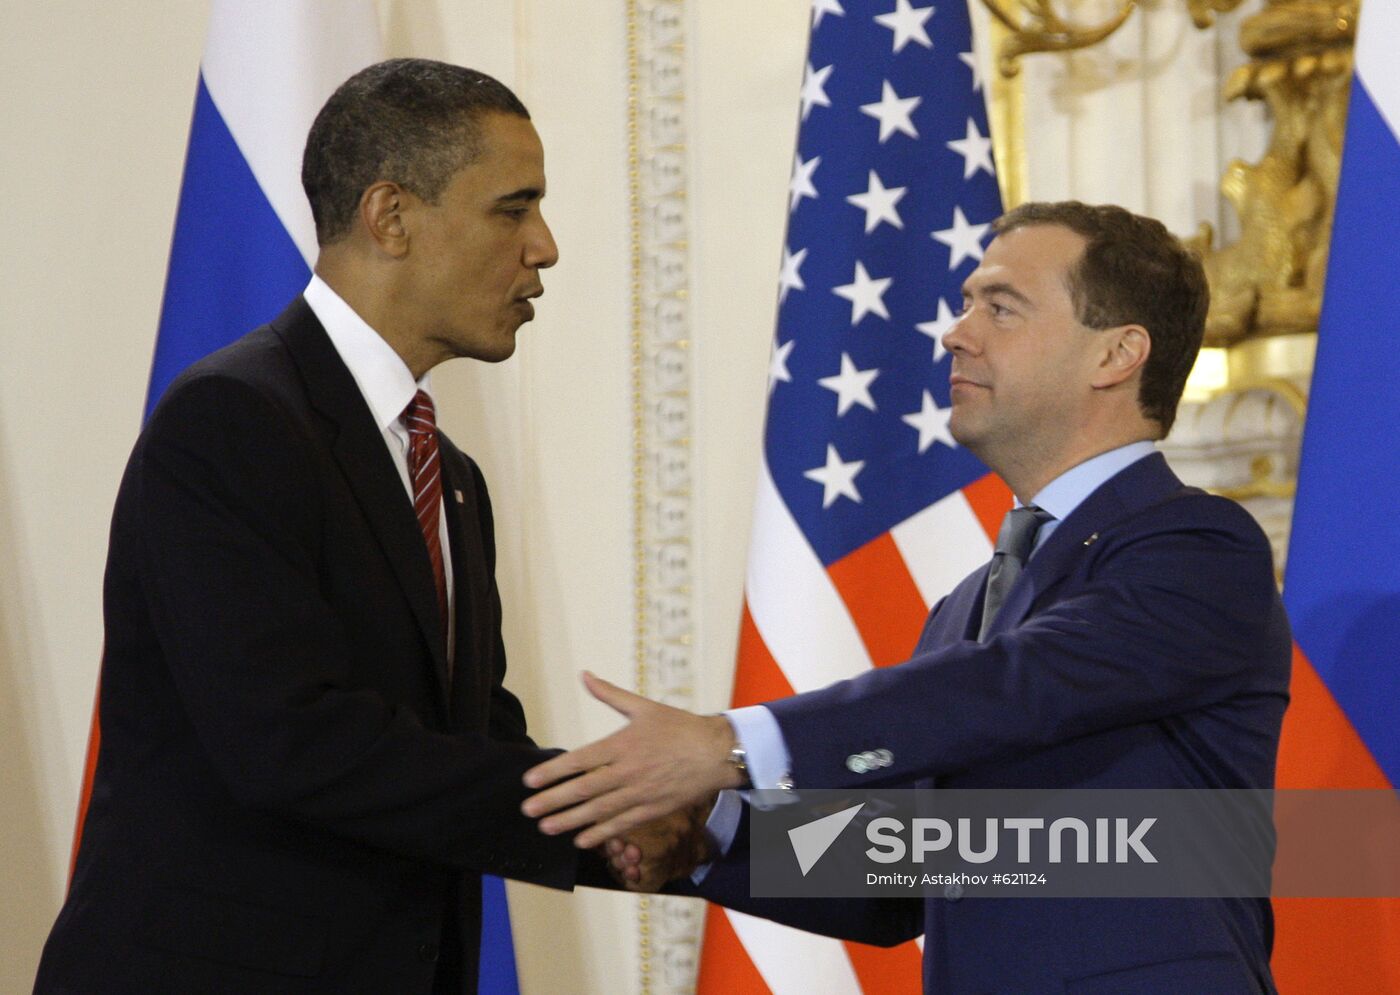 Medvedev and Obama sign new strategic arms reduction treaty